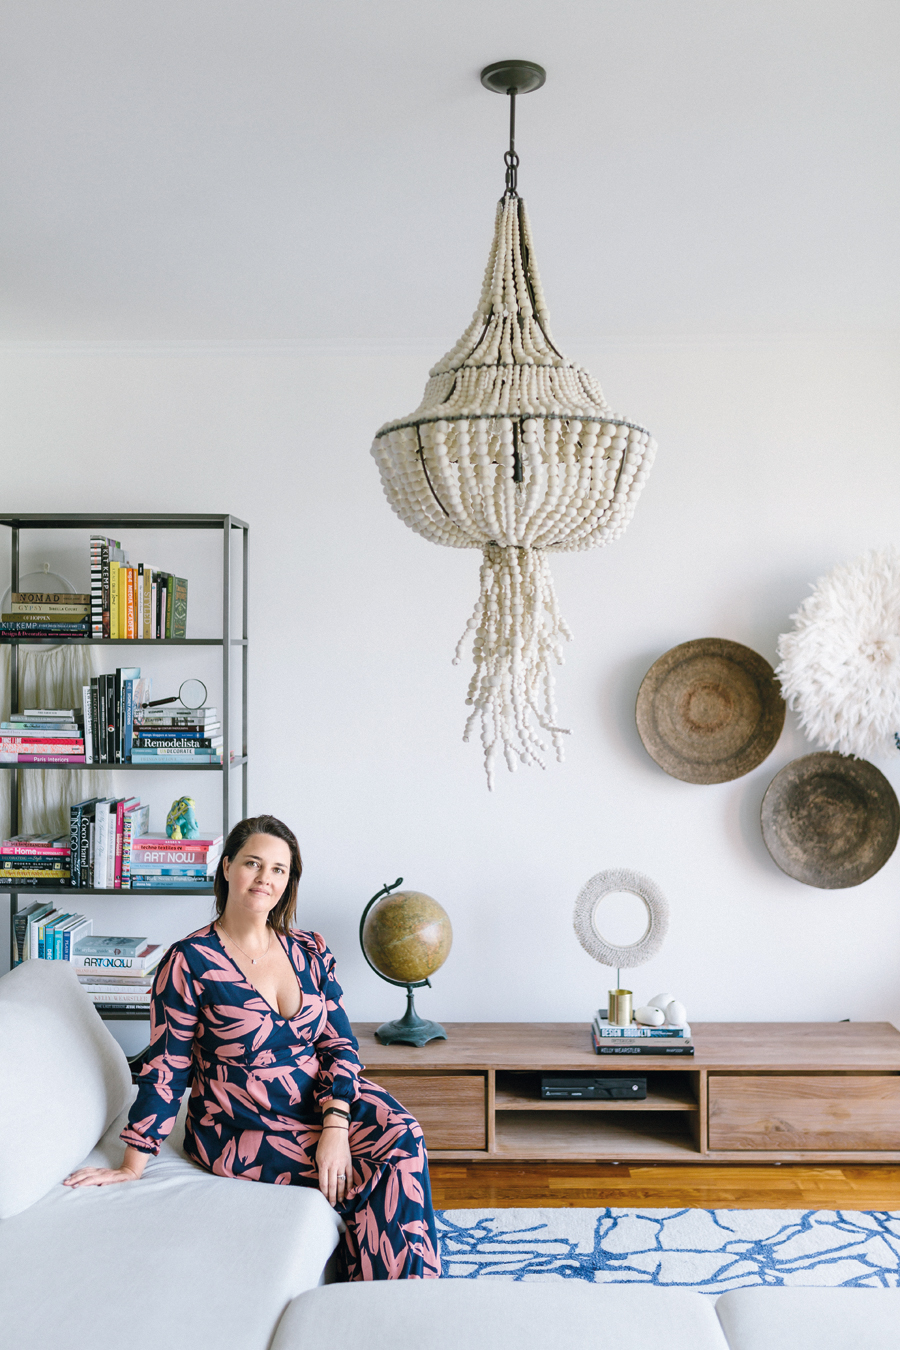 This interior designer’s Mid-Levels home is an ode to a life well-travelled